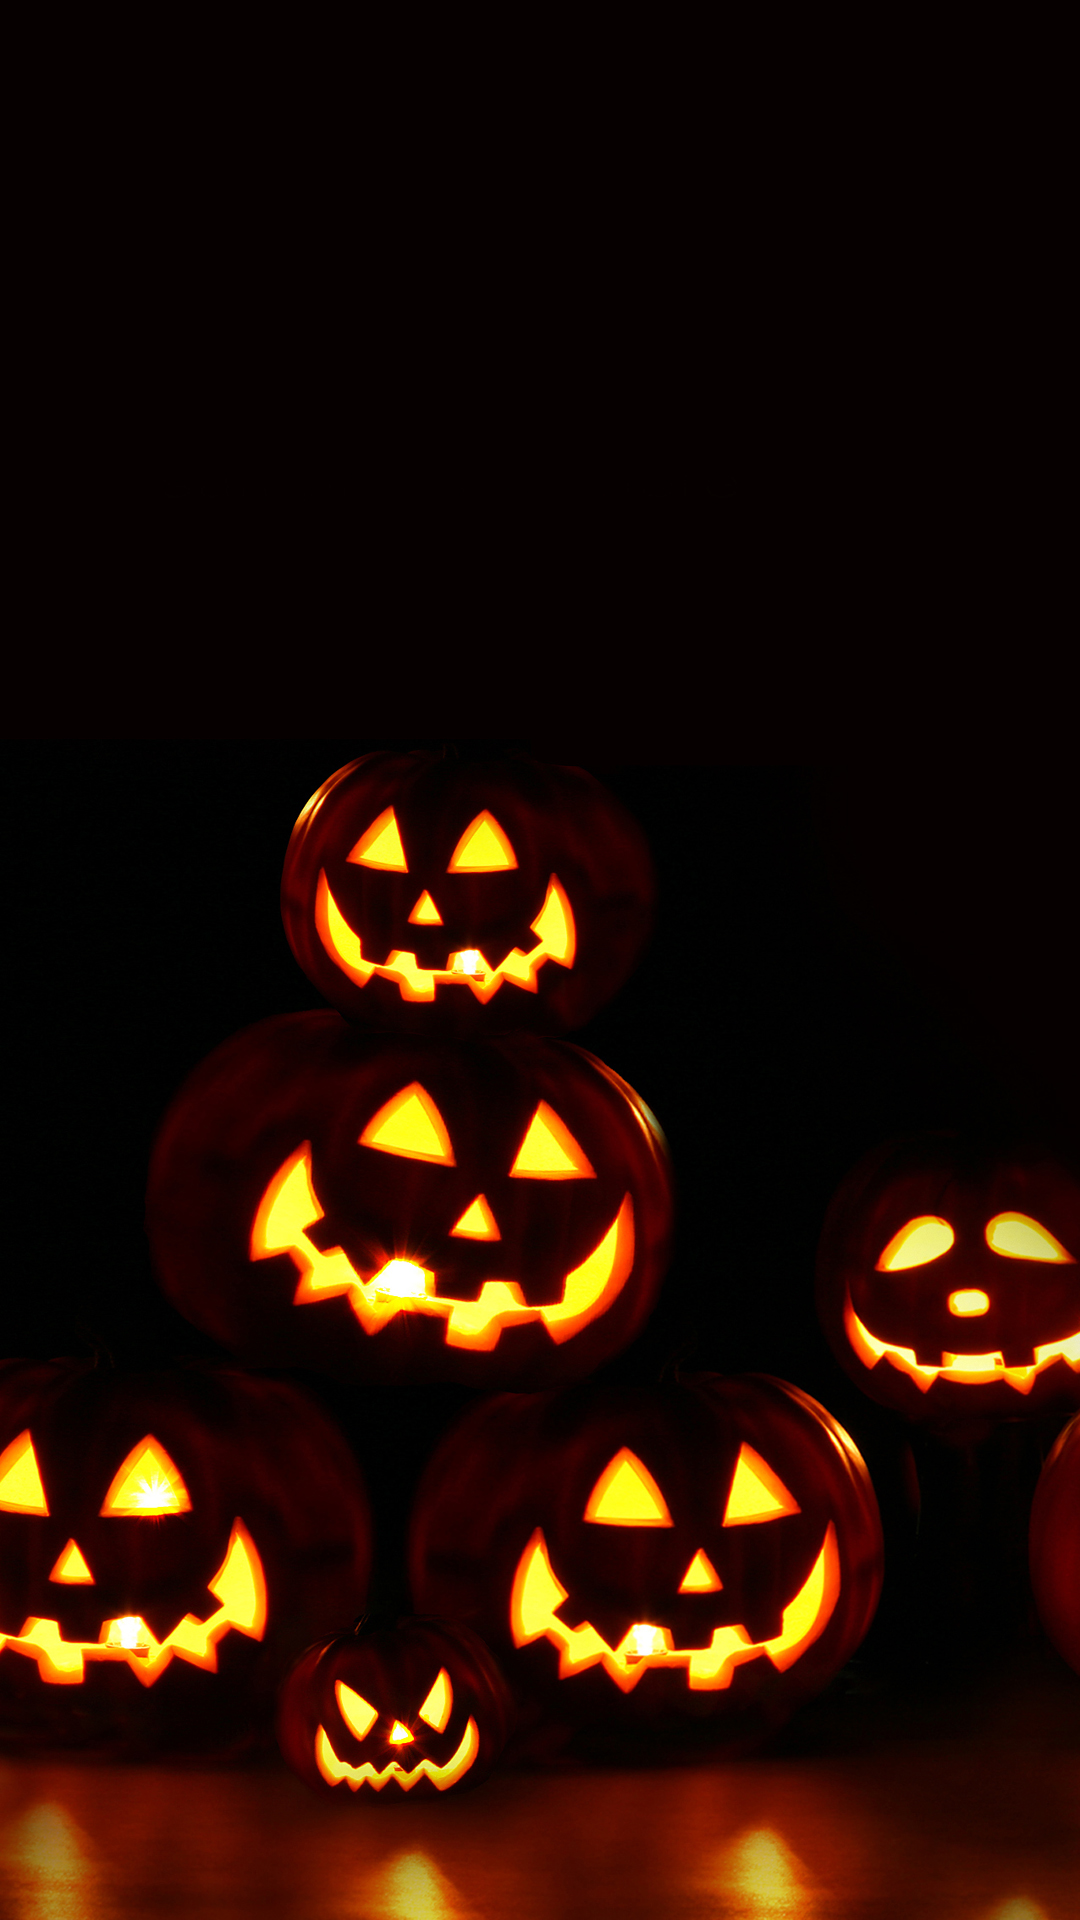 Pumpkins Halloween Best Htc One Wallpaper And Easy To